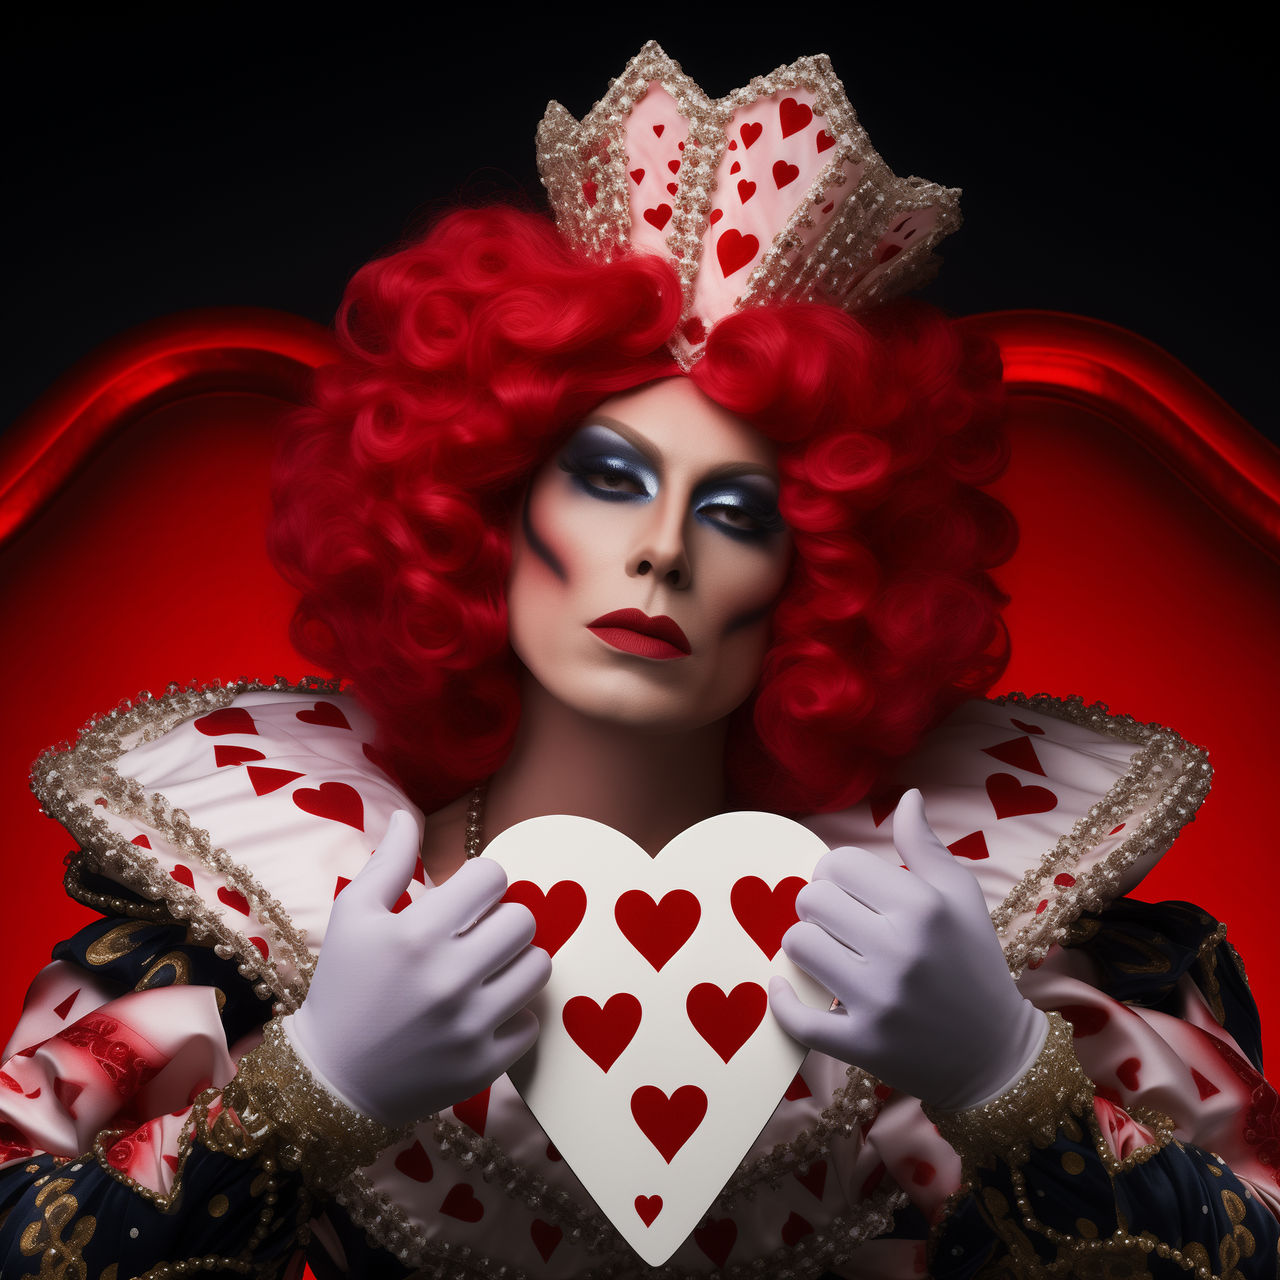 Drag Queen of Hearts 2 by Straygator69 on DeviantArt